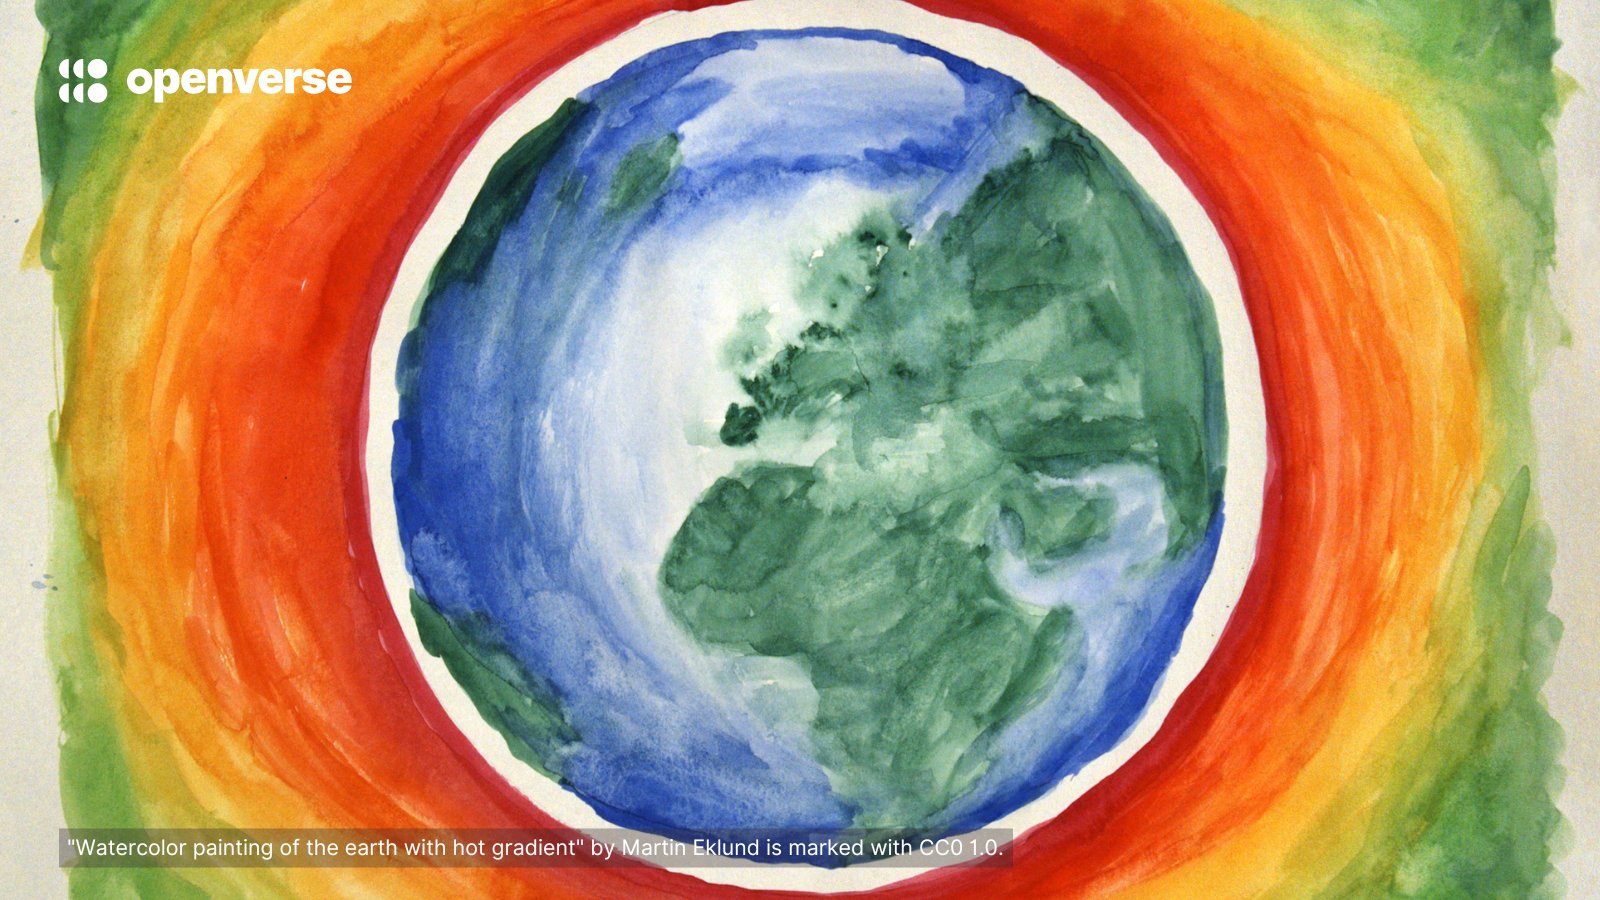 Openverse logo and image: "Watercolor painting of the earth with hot gradient" by Martin Eklund, licensed under CC0 1.0.